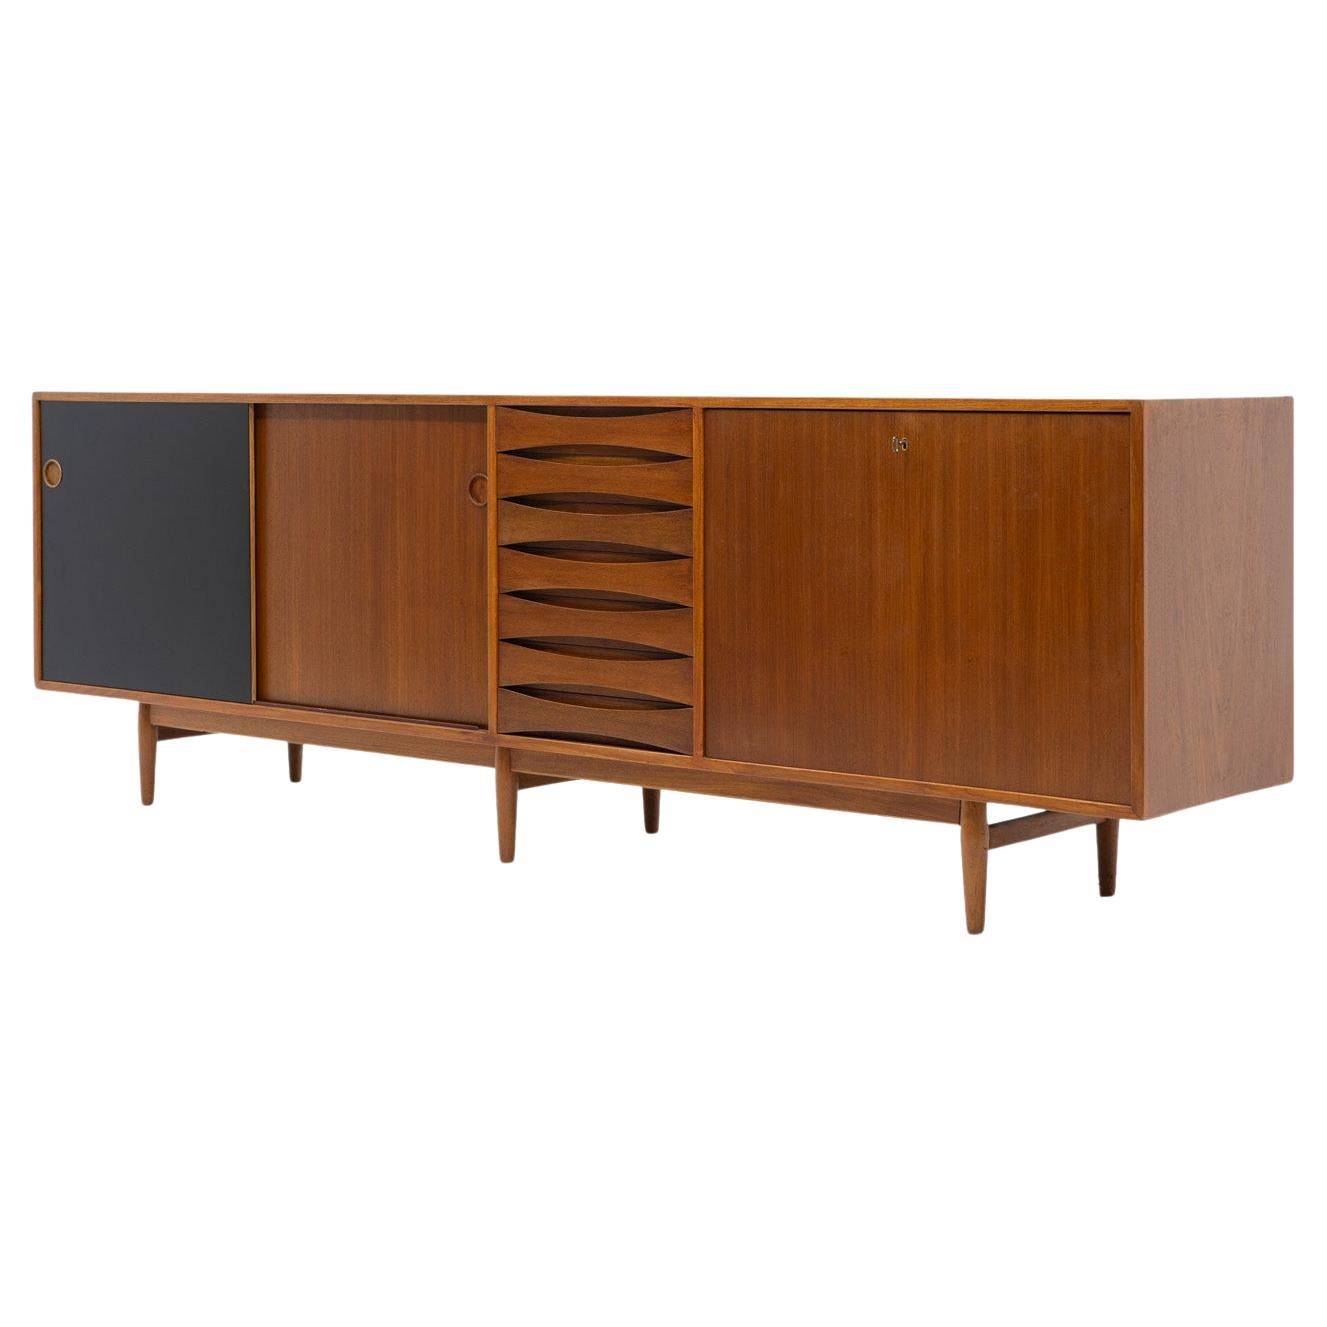 Danish Design Classic Arne Voder for Sibast, Triennale Sideboard, 1950s For Sale